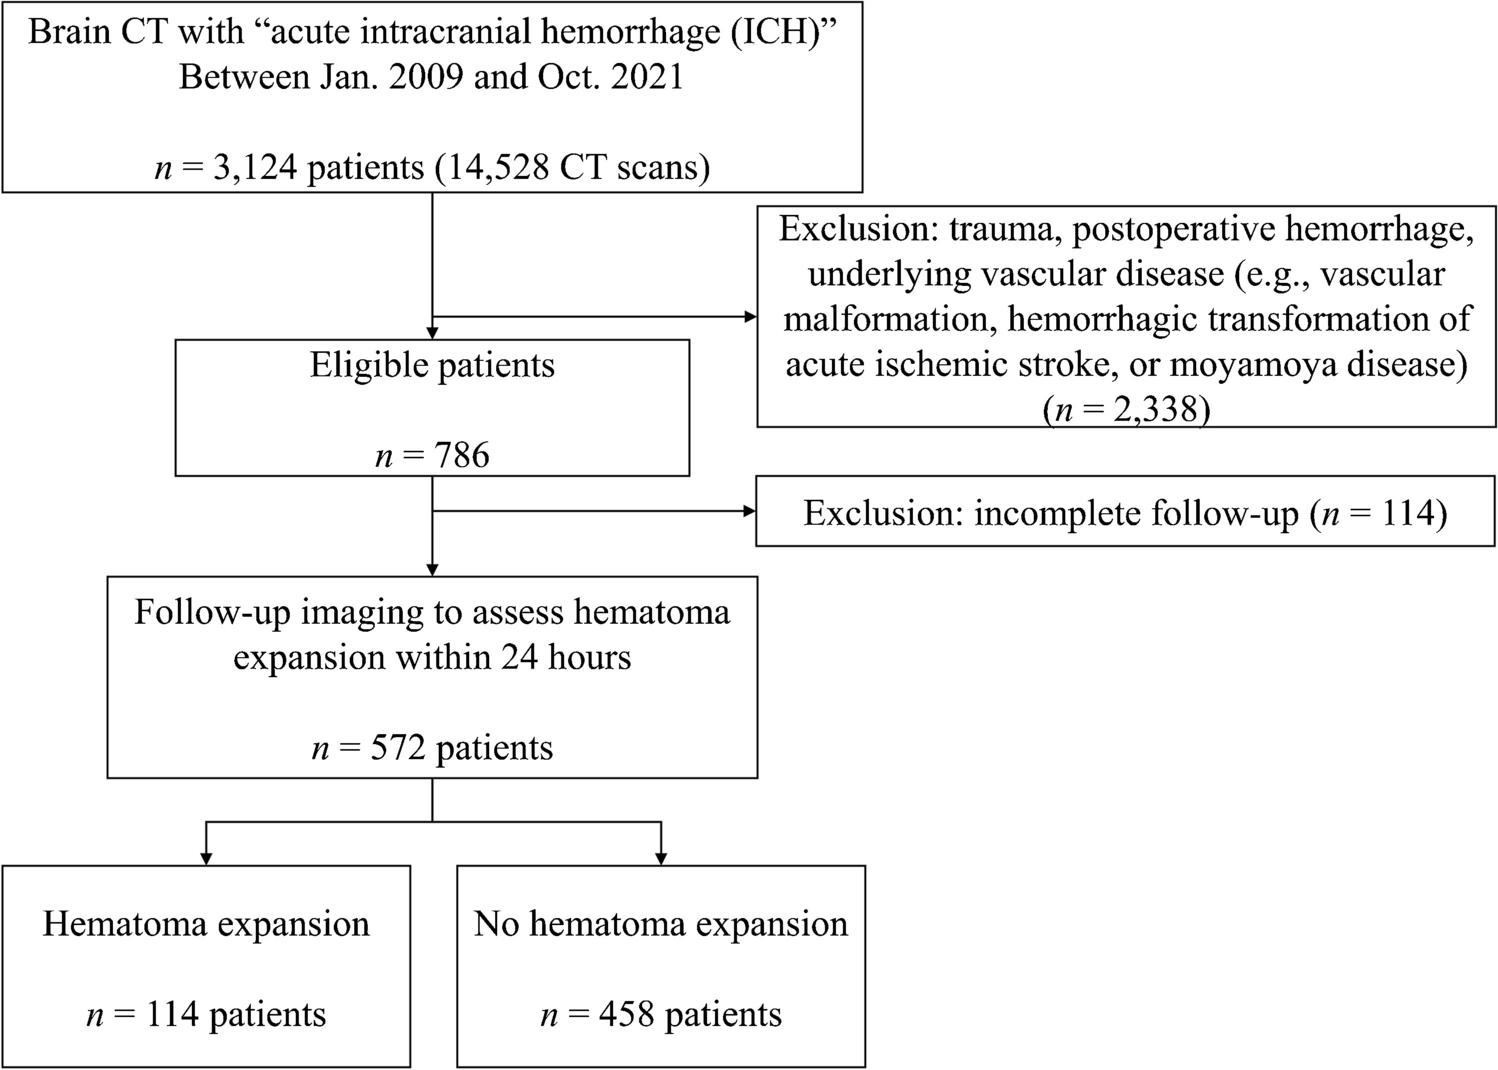 Predicting hematoma expansion in acute spontaneous intracerebral hemorrhage: integrating clinical factors with a multitask deep learning model for non-contrast head CT